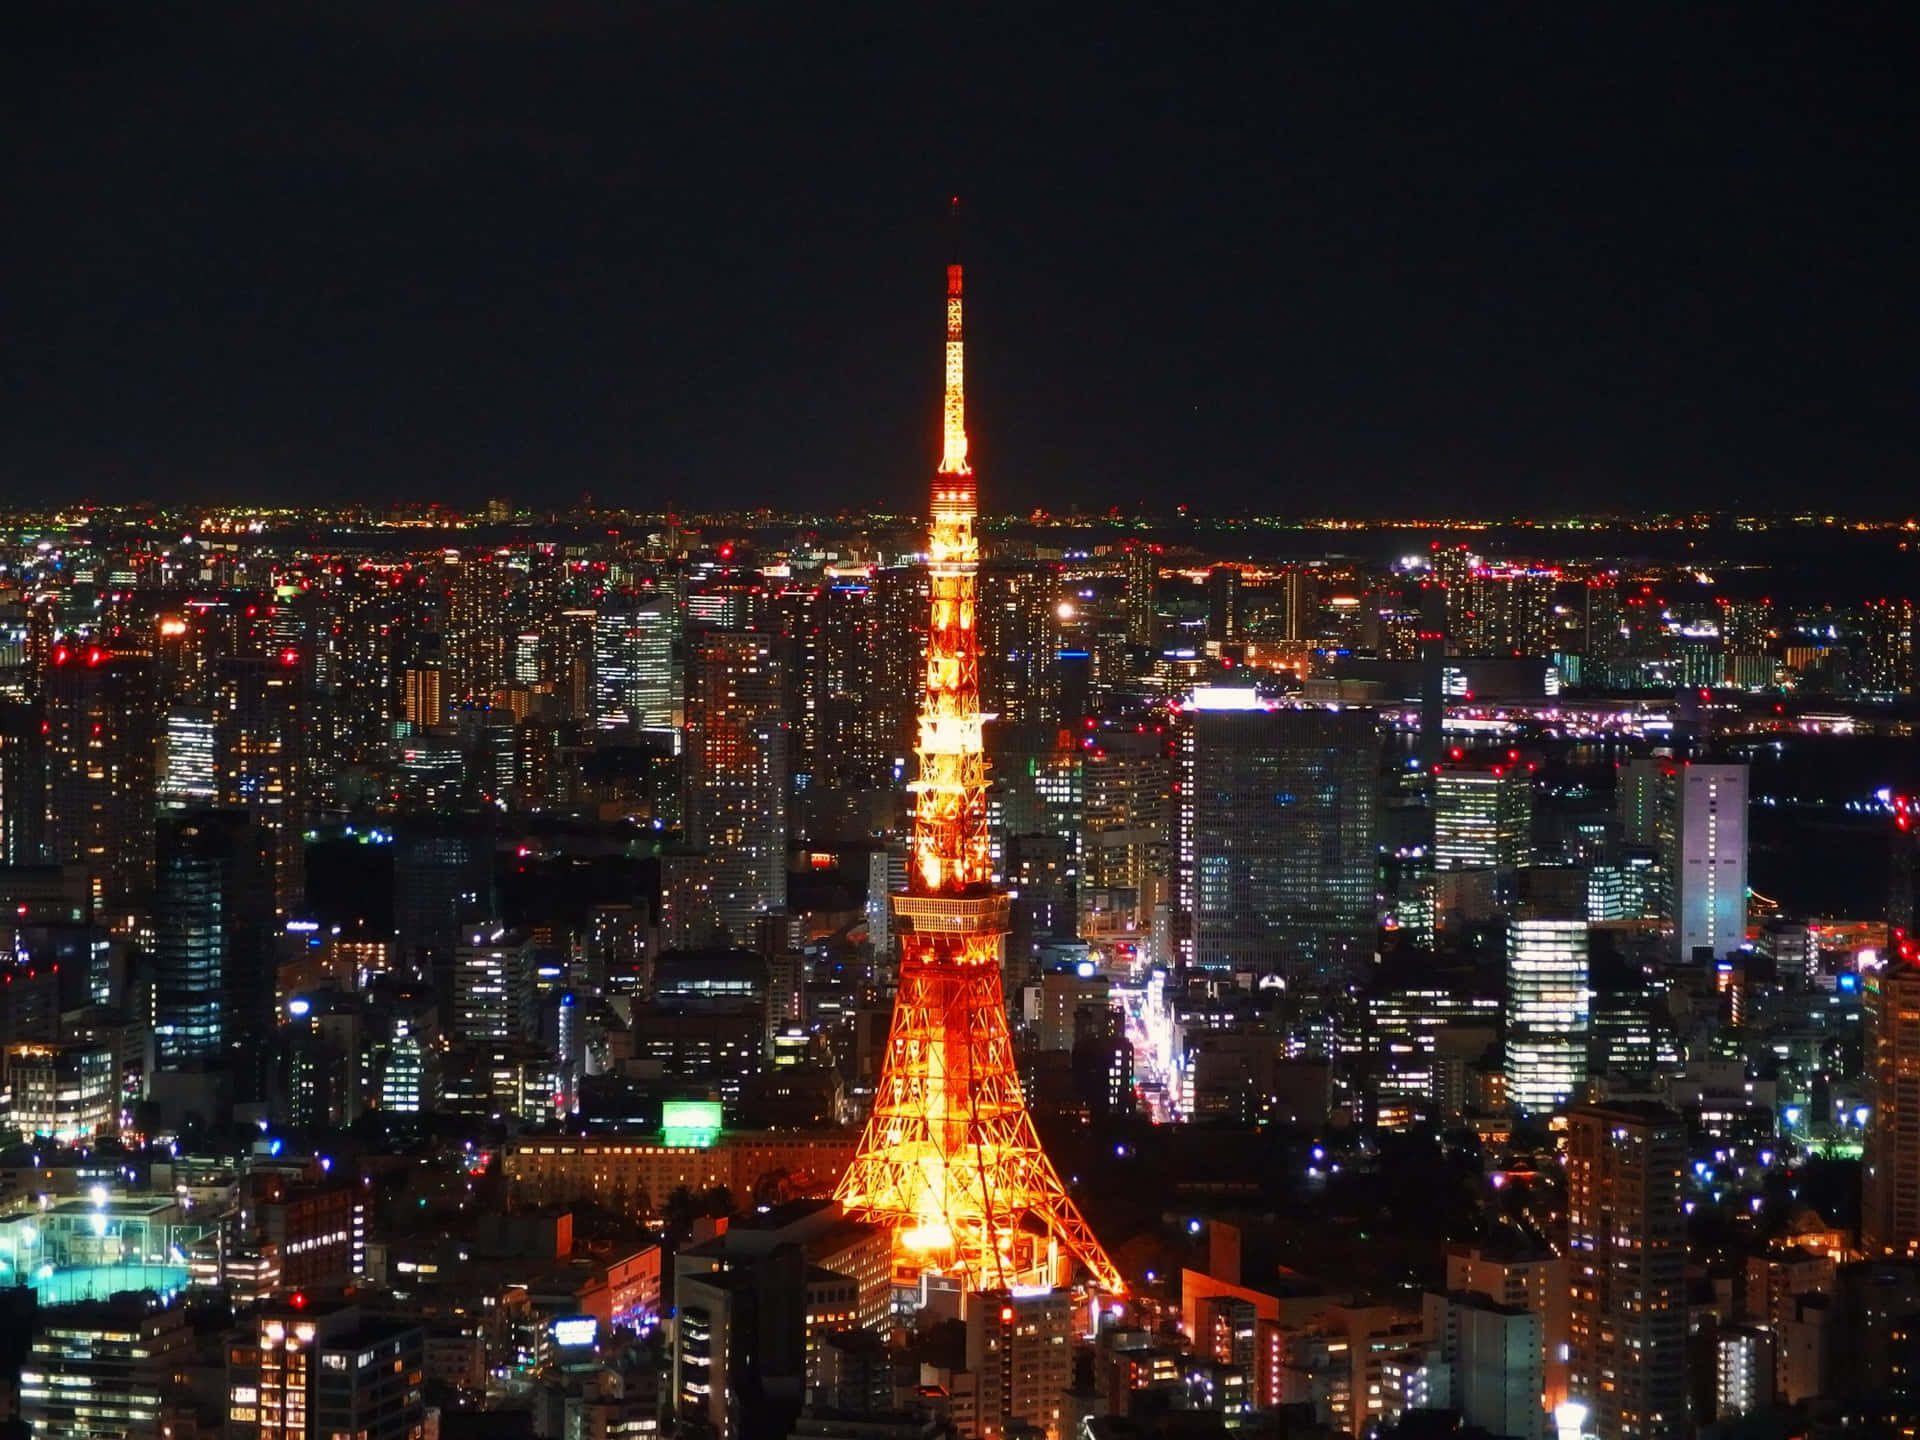 Experience the beauty of Tokyo at night.